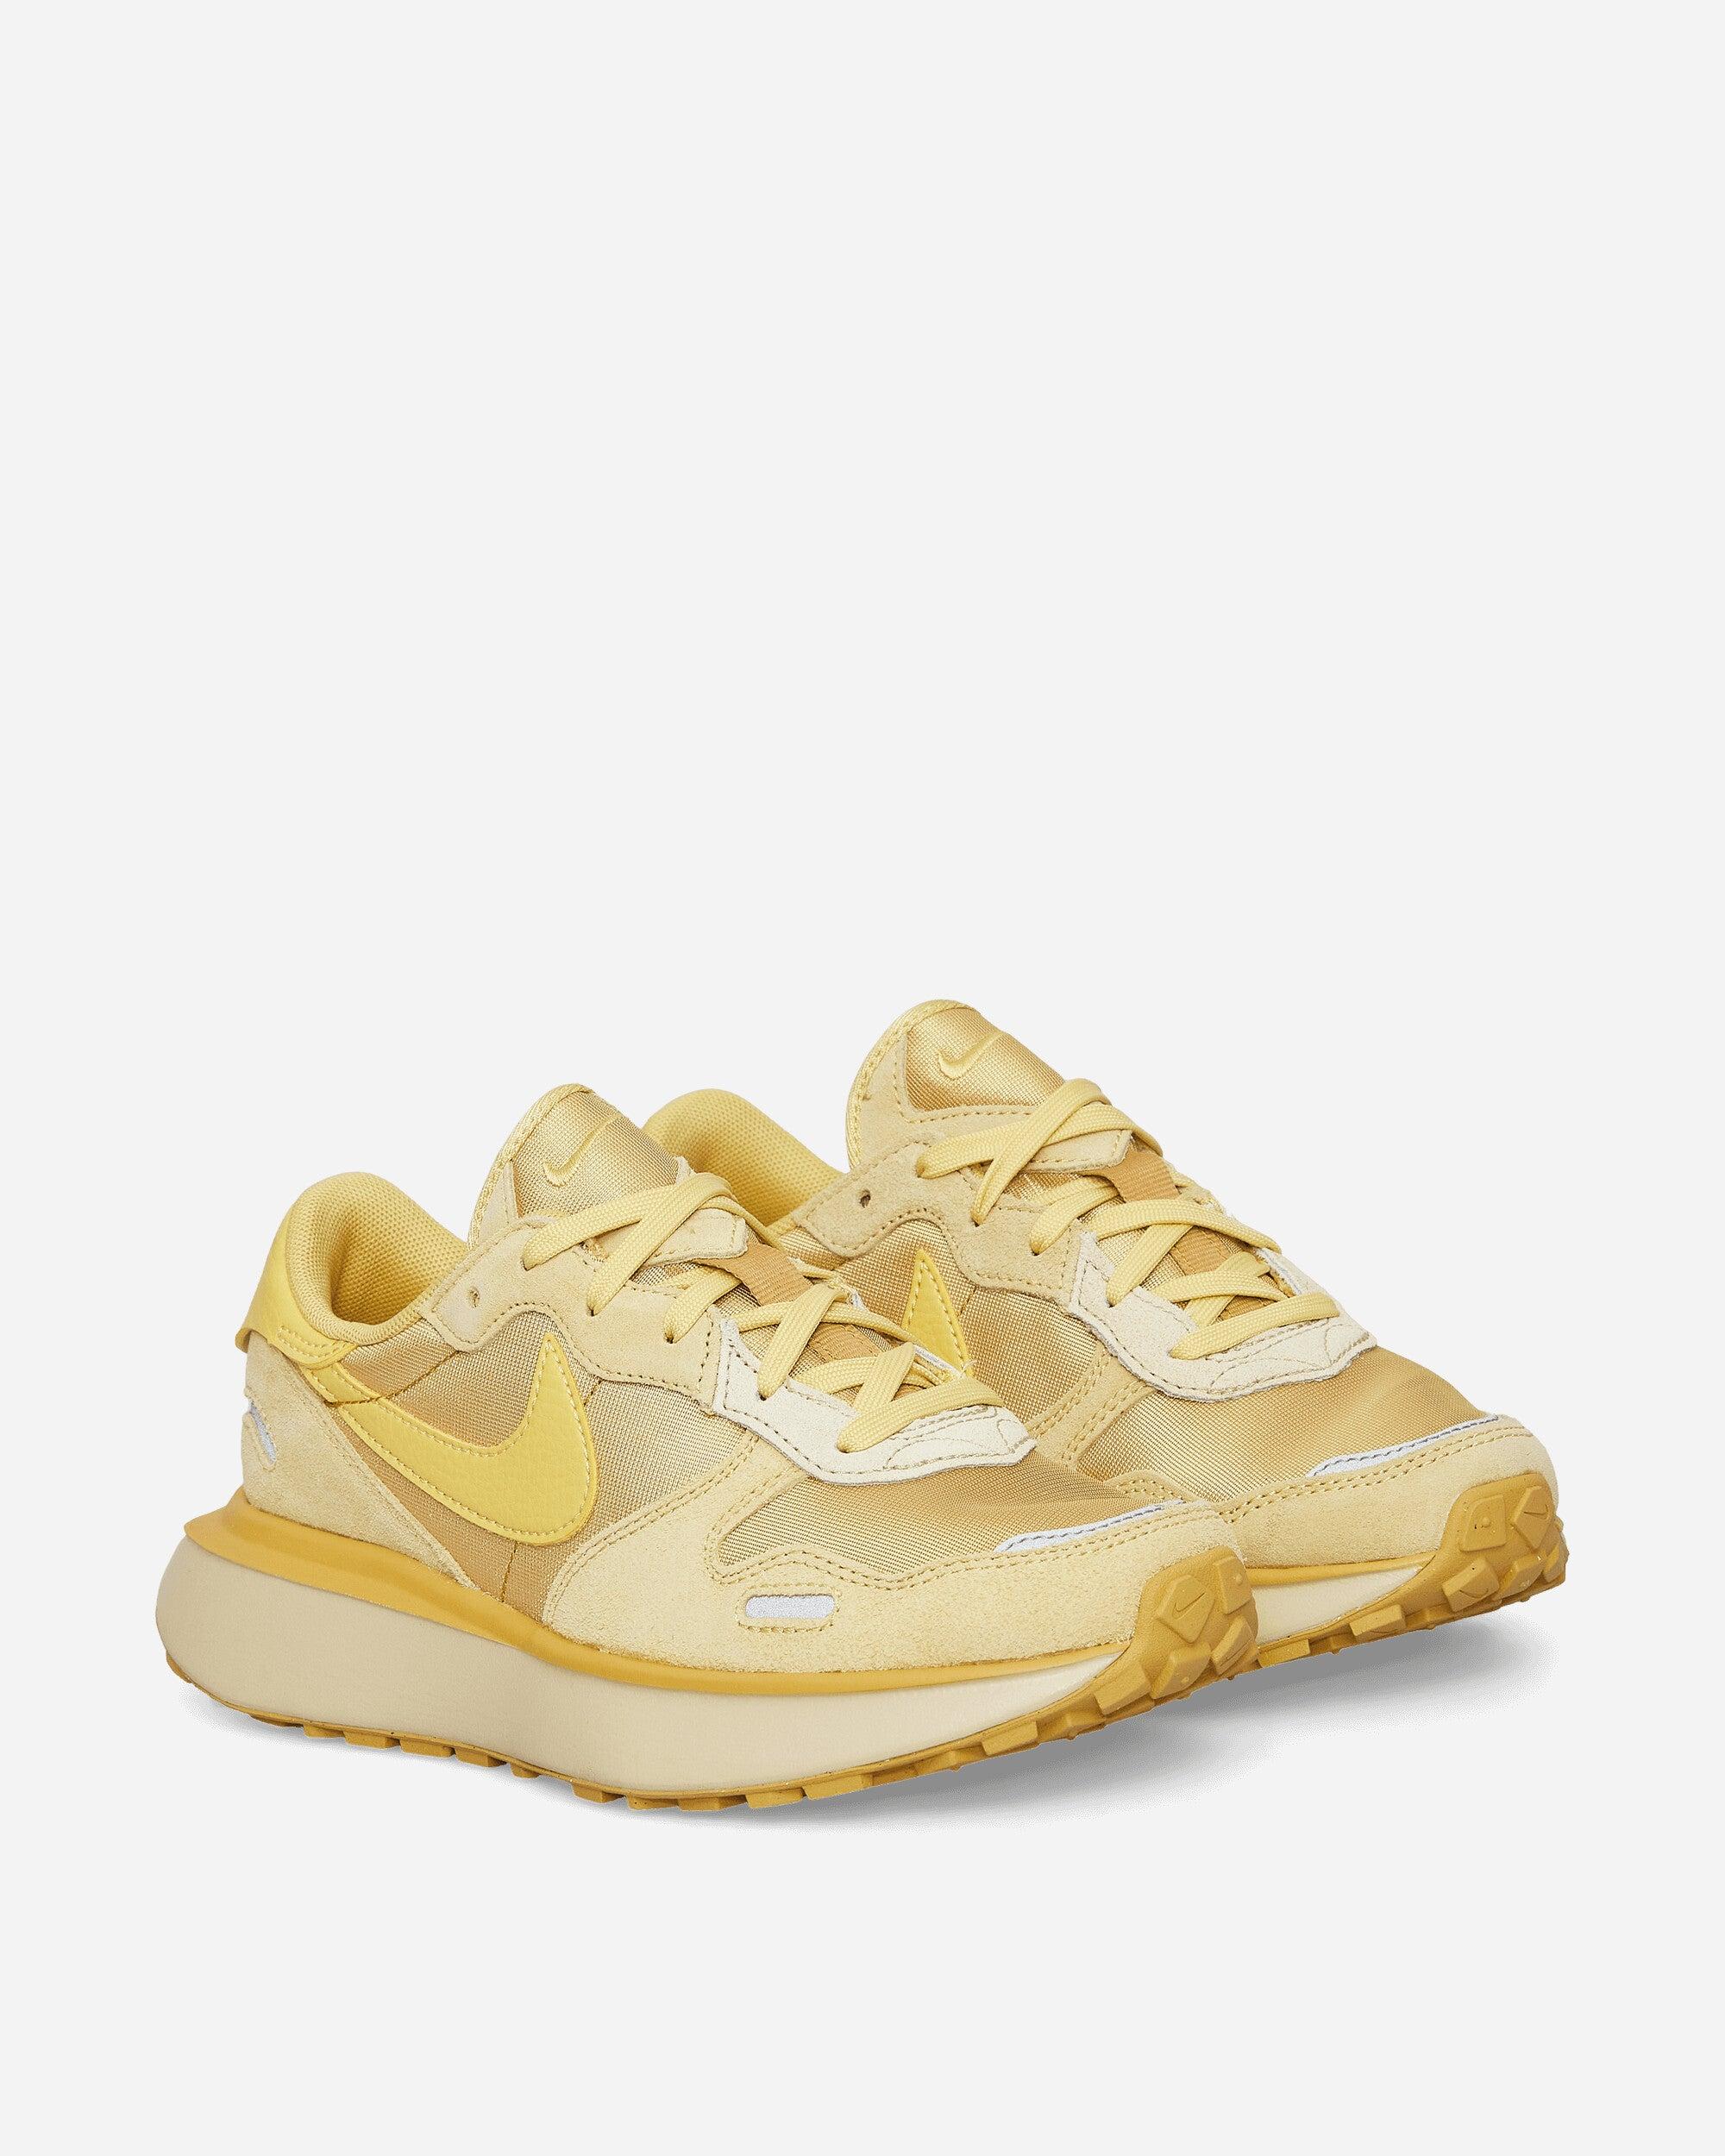 Nike Wmns Phoenix Waffle Sneakers Wheat Gold / Saturn Gold in Natural | Lyst